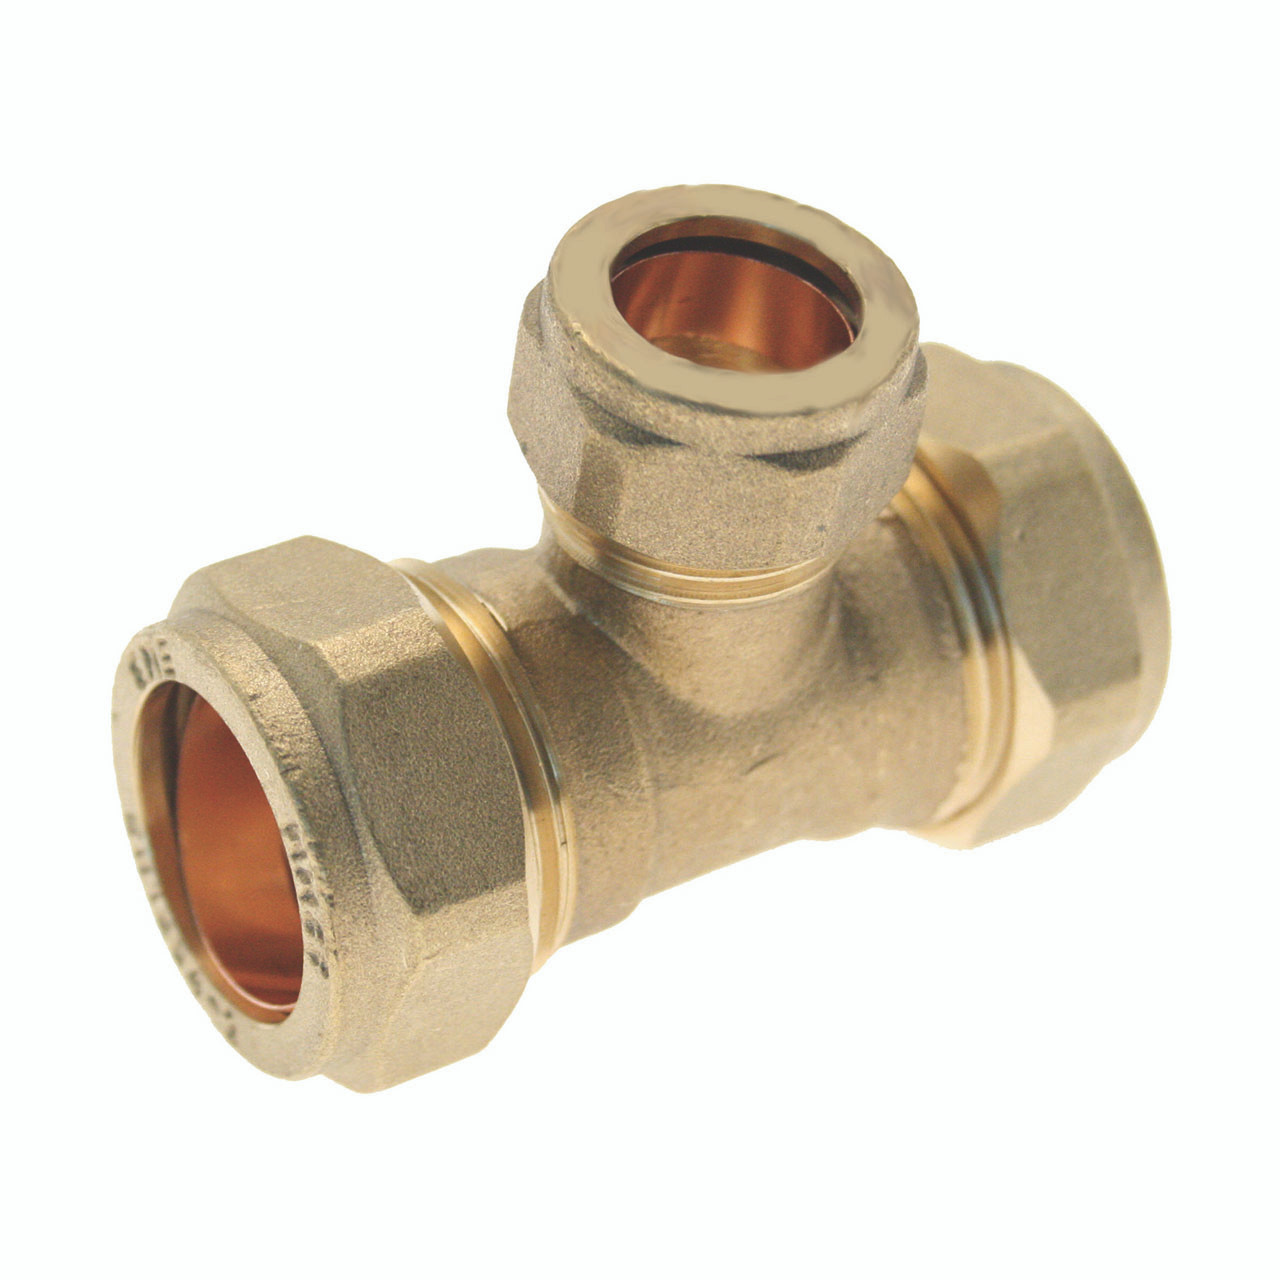 Photograph of Compression Fitting Reducing Tee 22mm x 22mm x 15mm